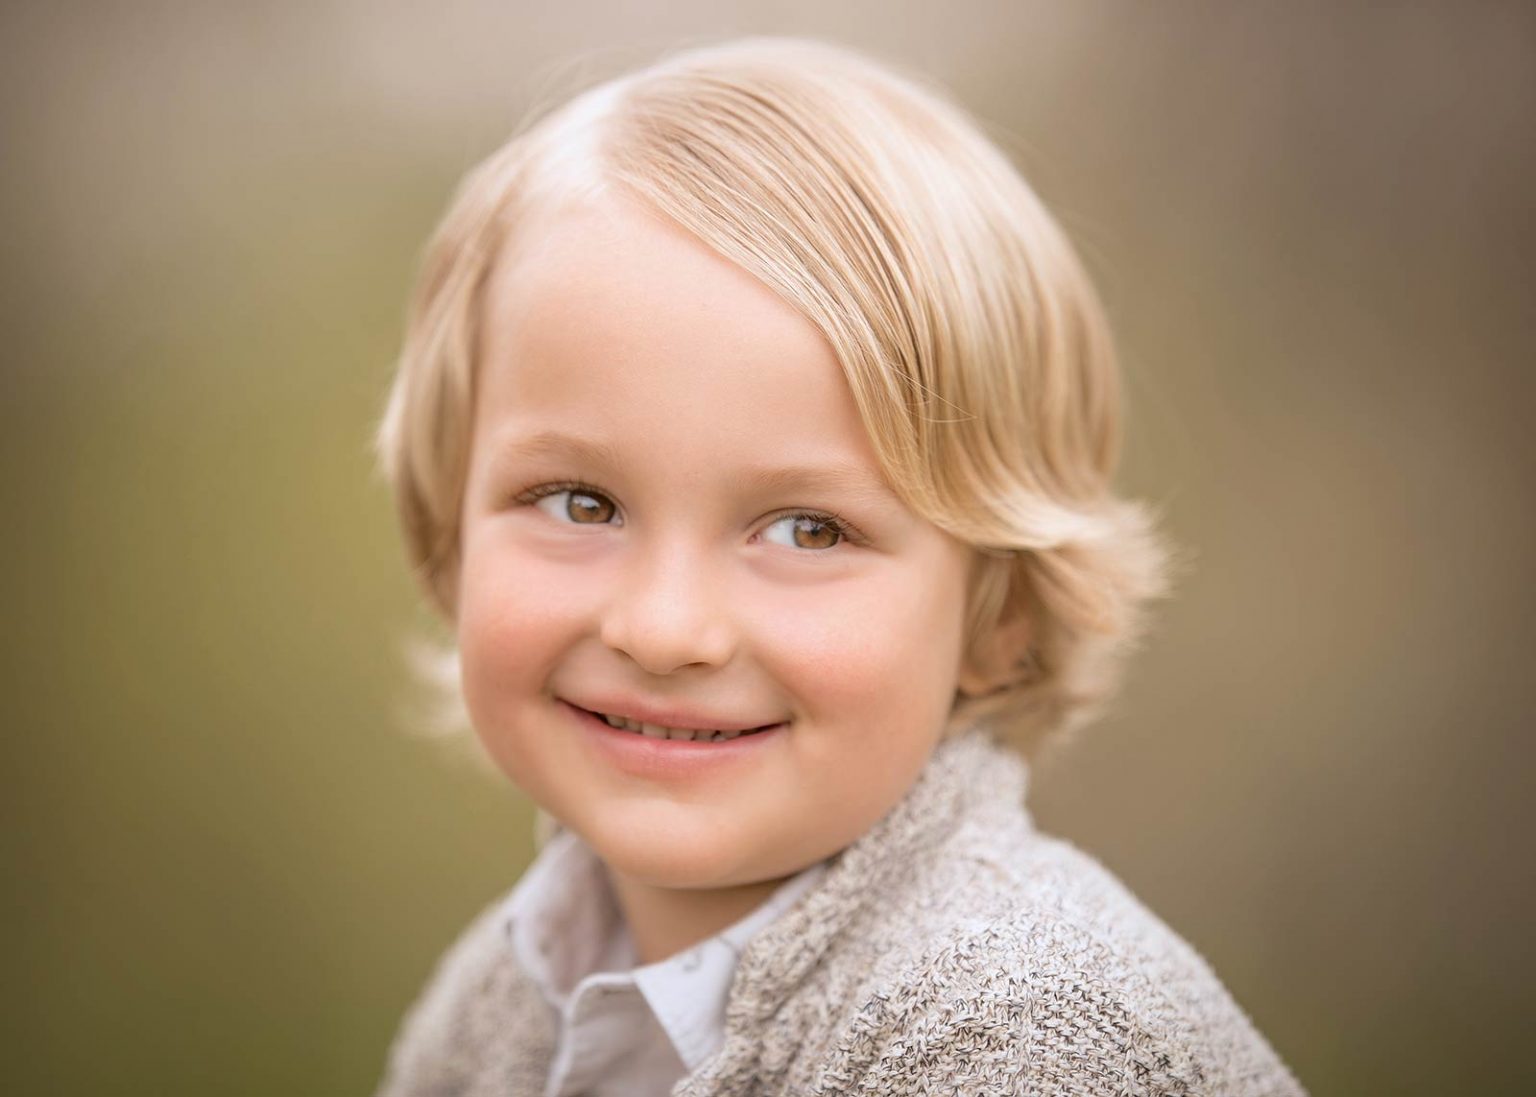 Smiling boy with blonde hair smiling in Sag Harbor NY